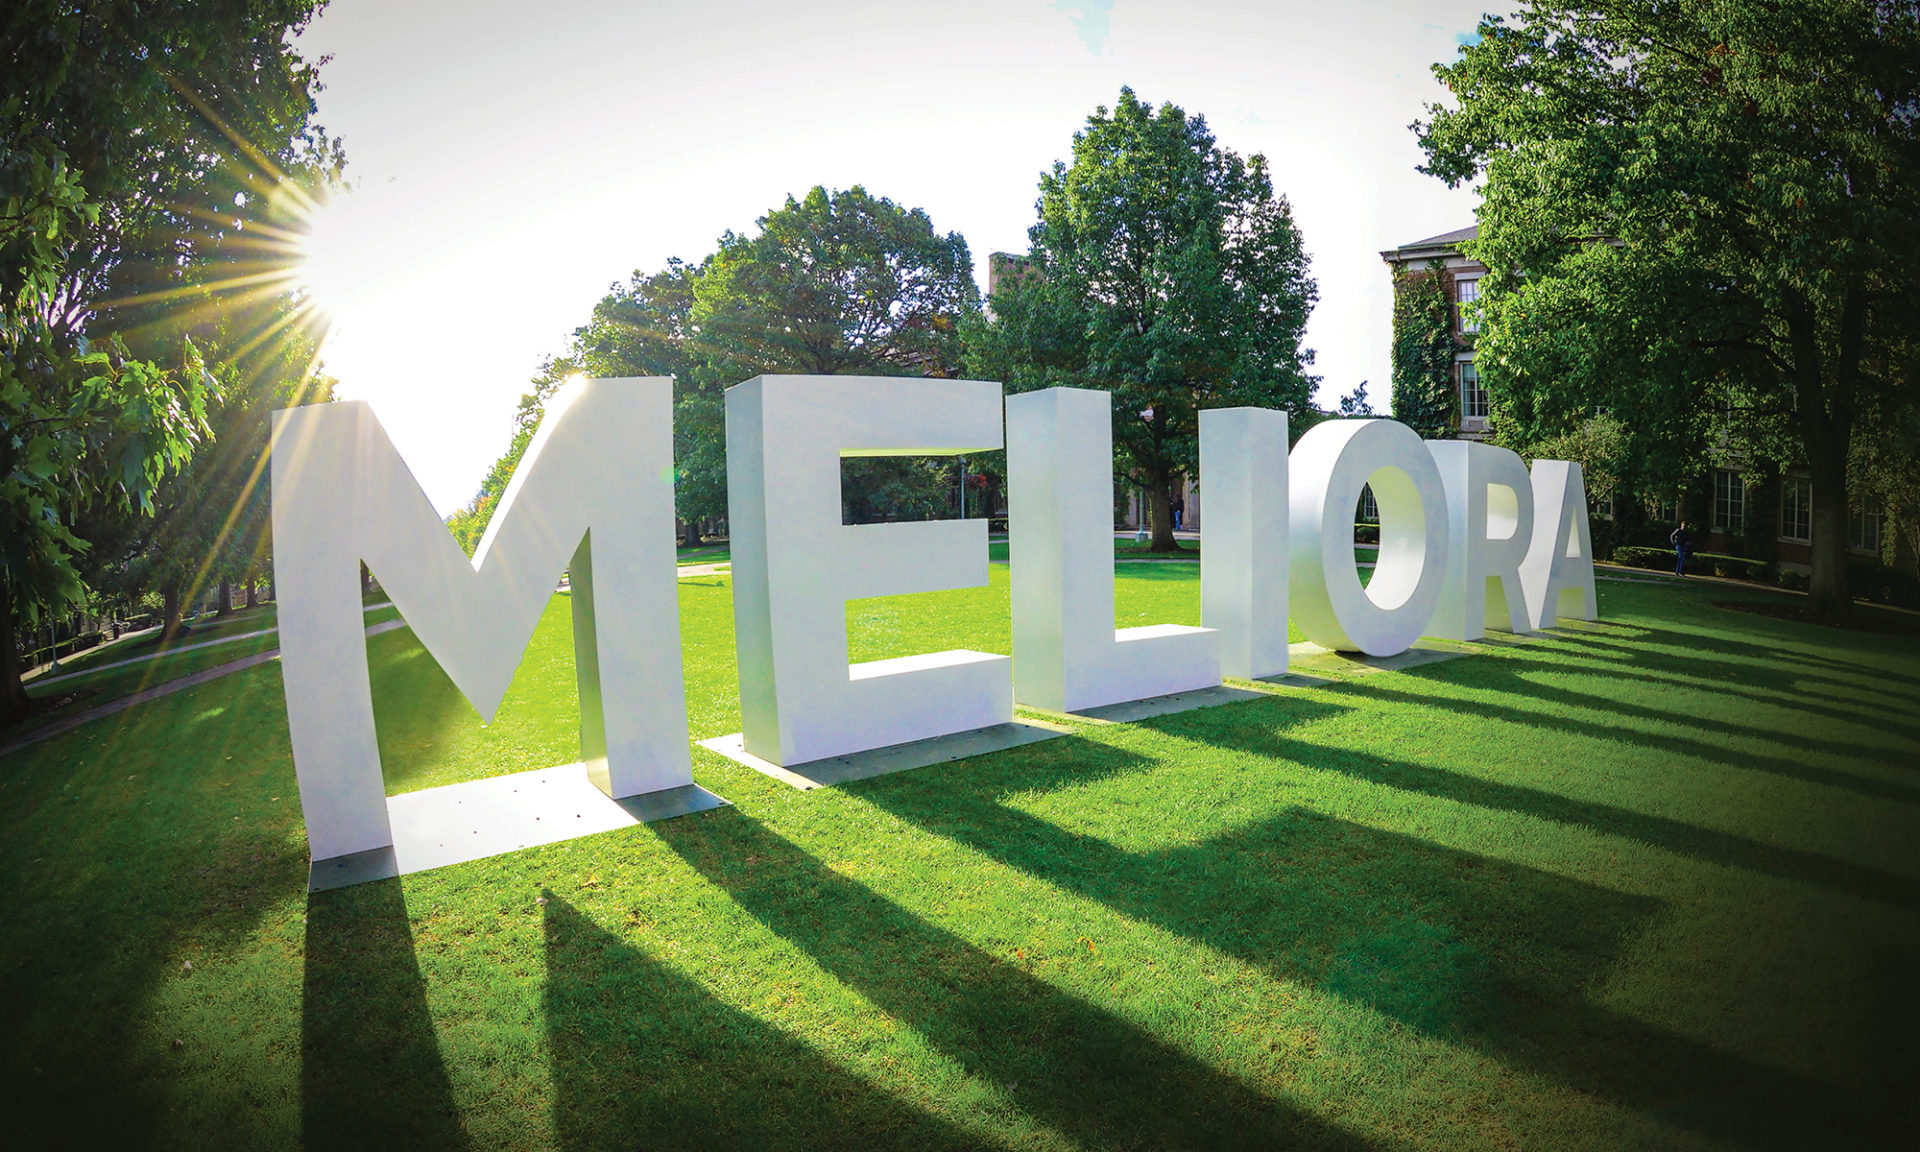 Life-size Meliora letters decorate the quad on the University of Rochester River Campus.